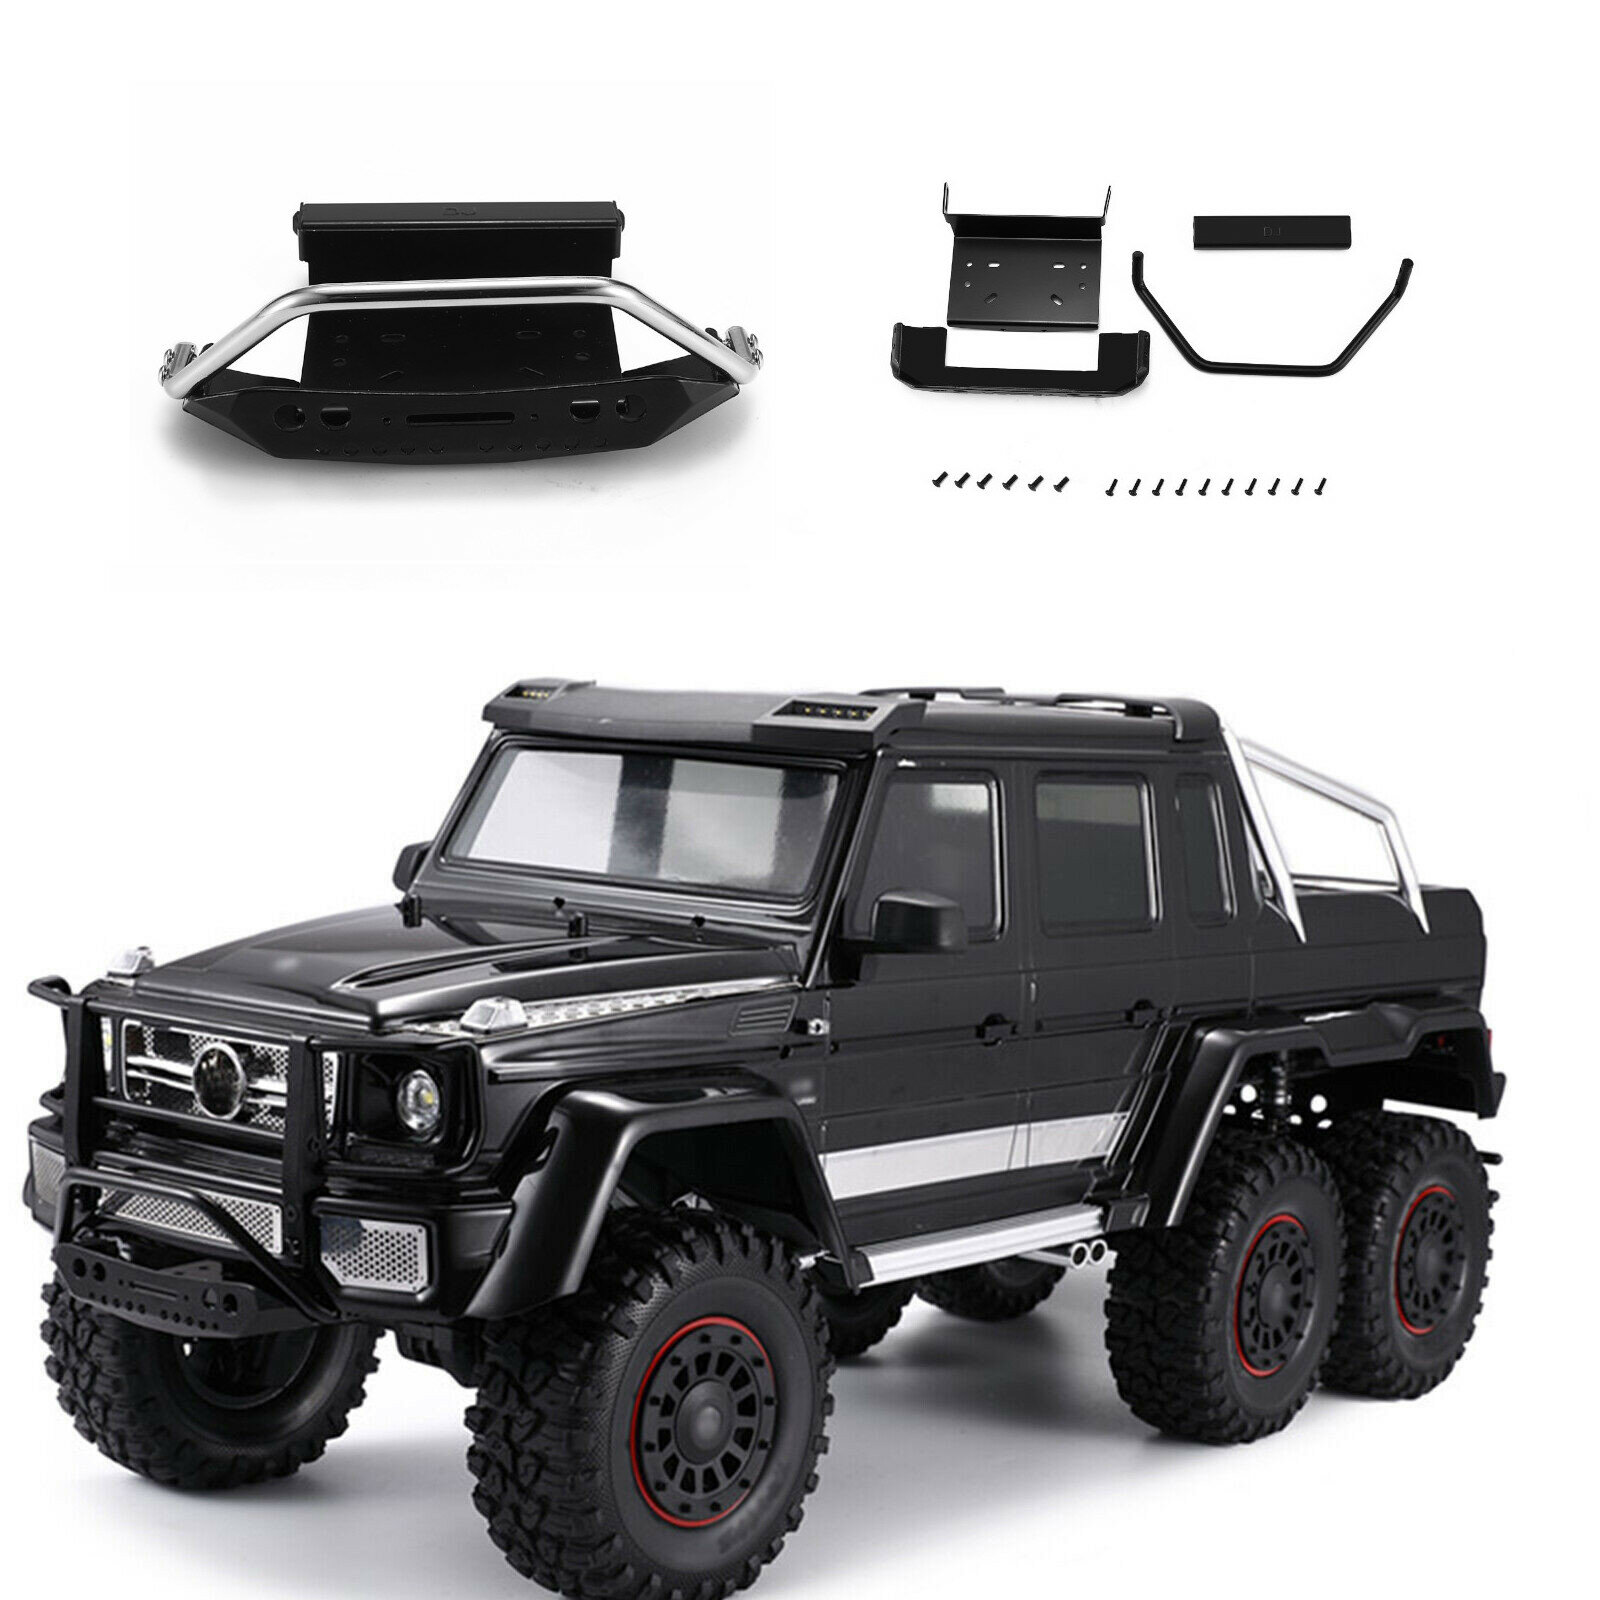 

RBR/C Upgraded Metal Front Lower Bumper Protector for 1/10 TRX4 TRX6 Mercedes G63 G500 6X6 DIY RC Cars Vehicles Models P